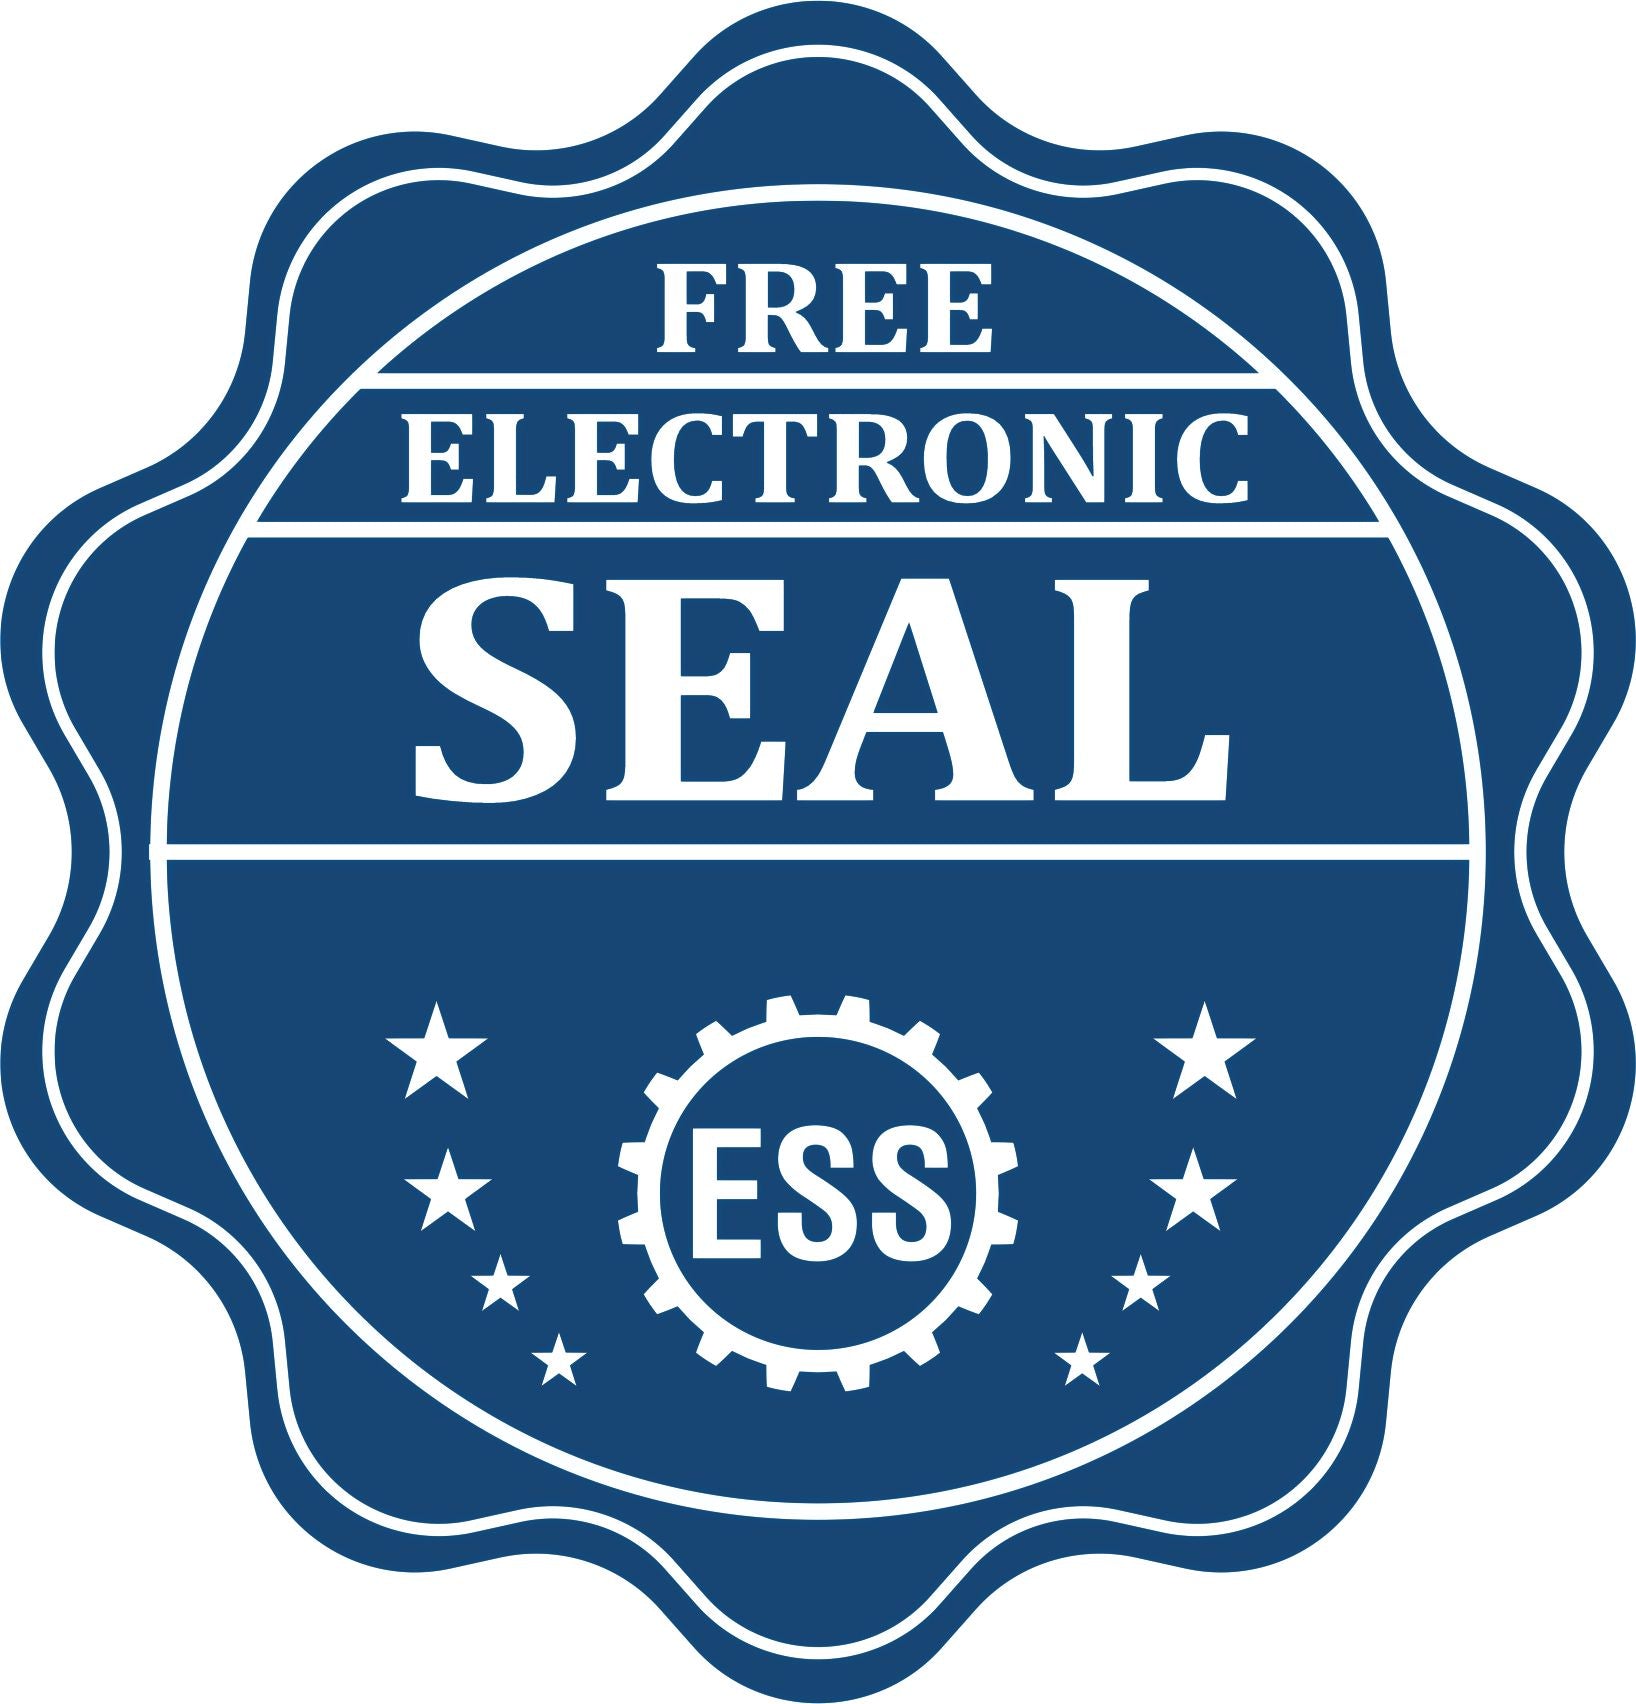 A badge showing a free electronic seal for the Super Slim Wisconsin Notary Public Stamp with stars and the ESS gear on the emblem.